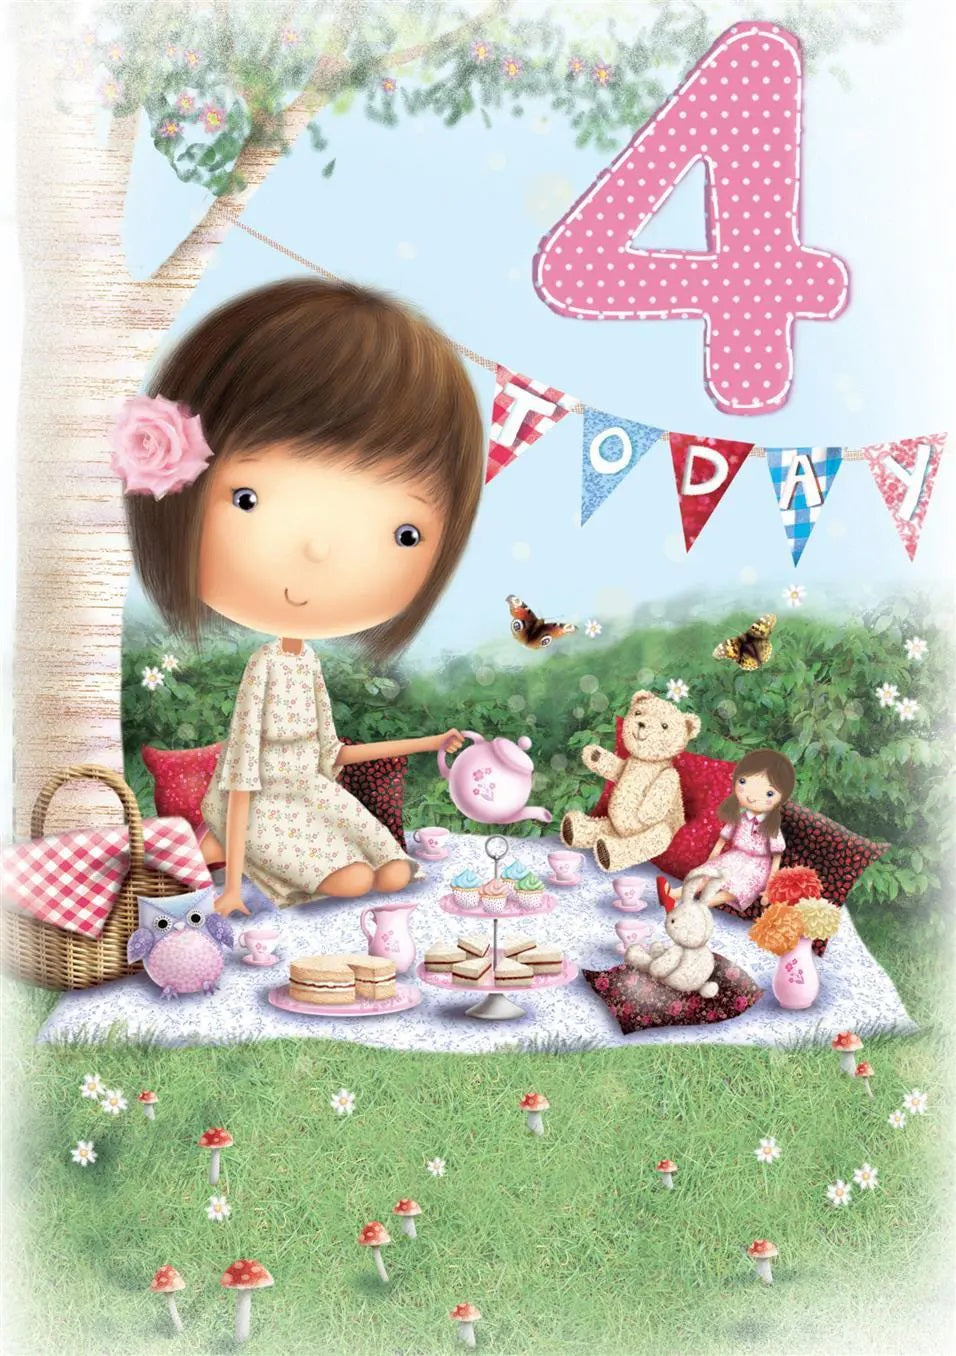 4th Birthday Card - Picnic Time With Friends 